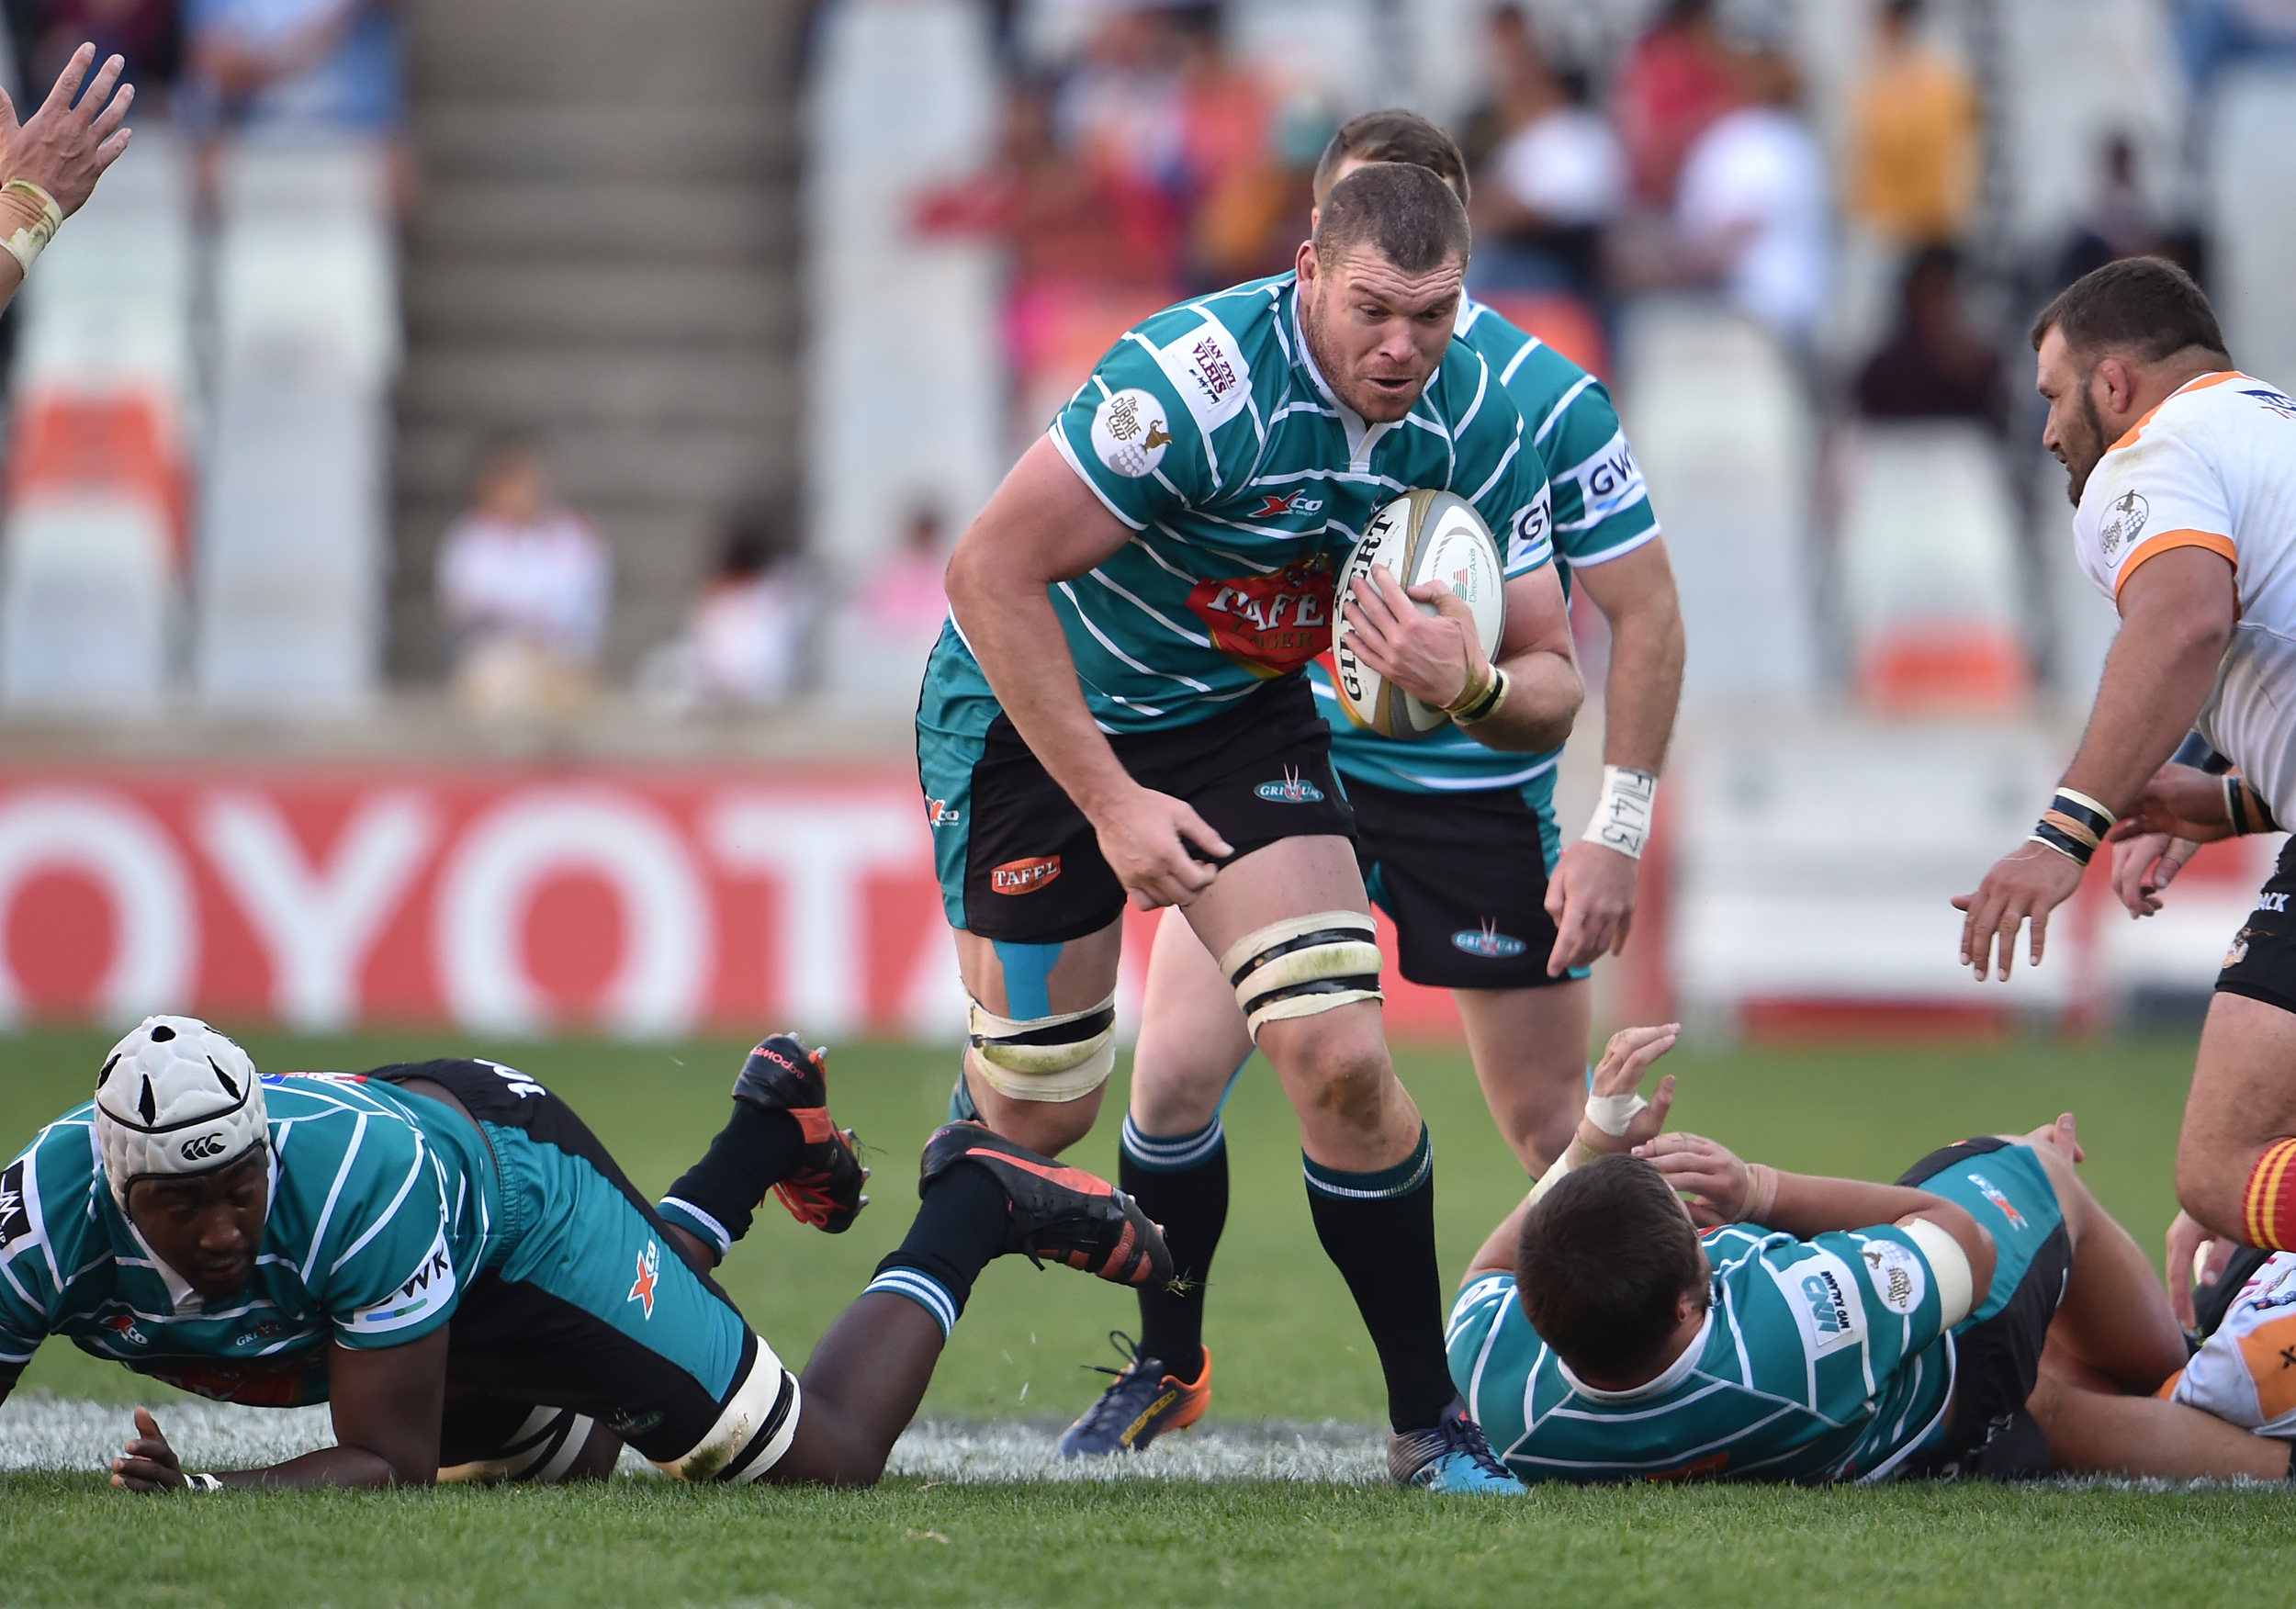 Dramatic win for Griquas in Bloemfontein